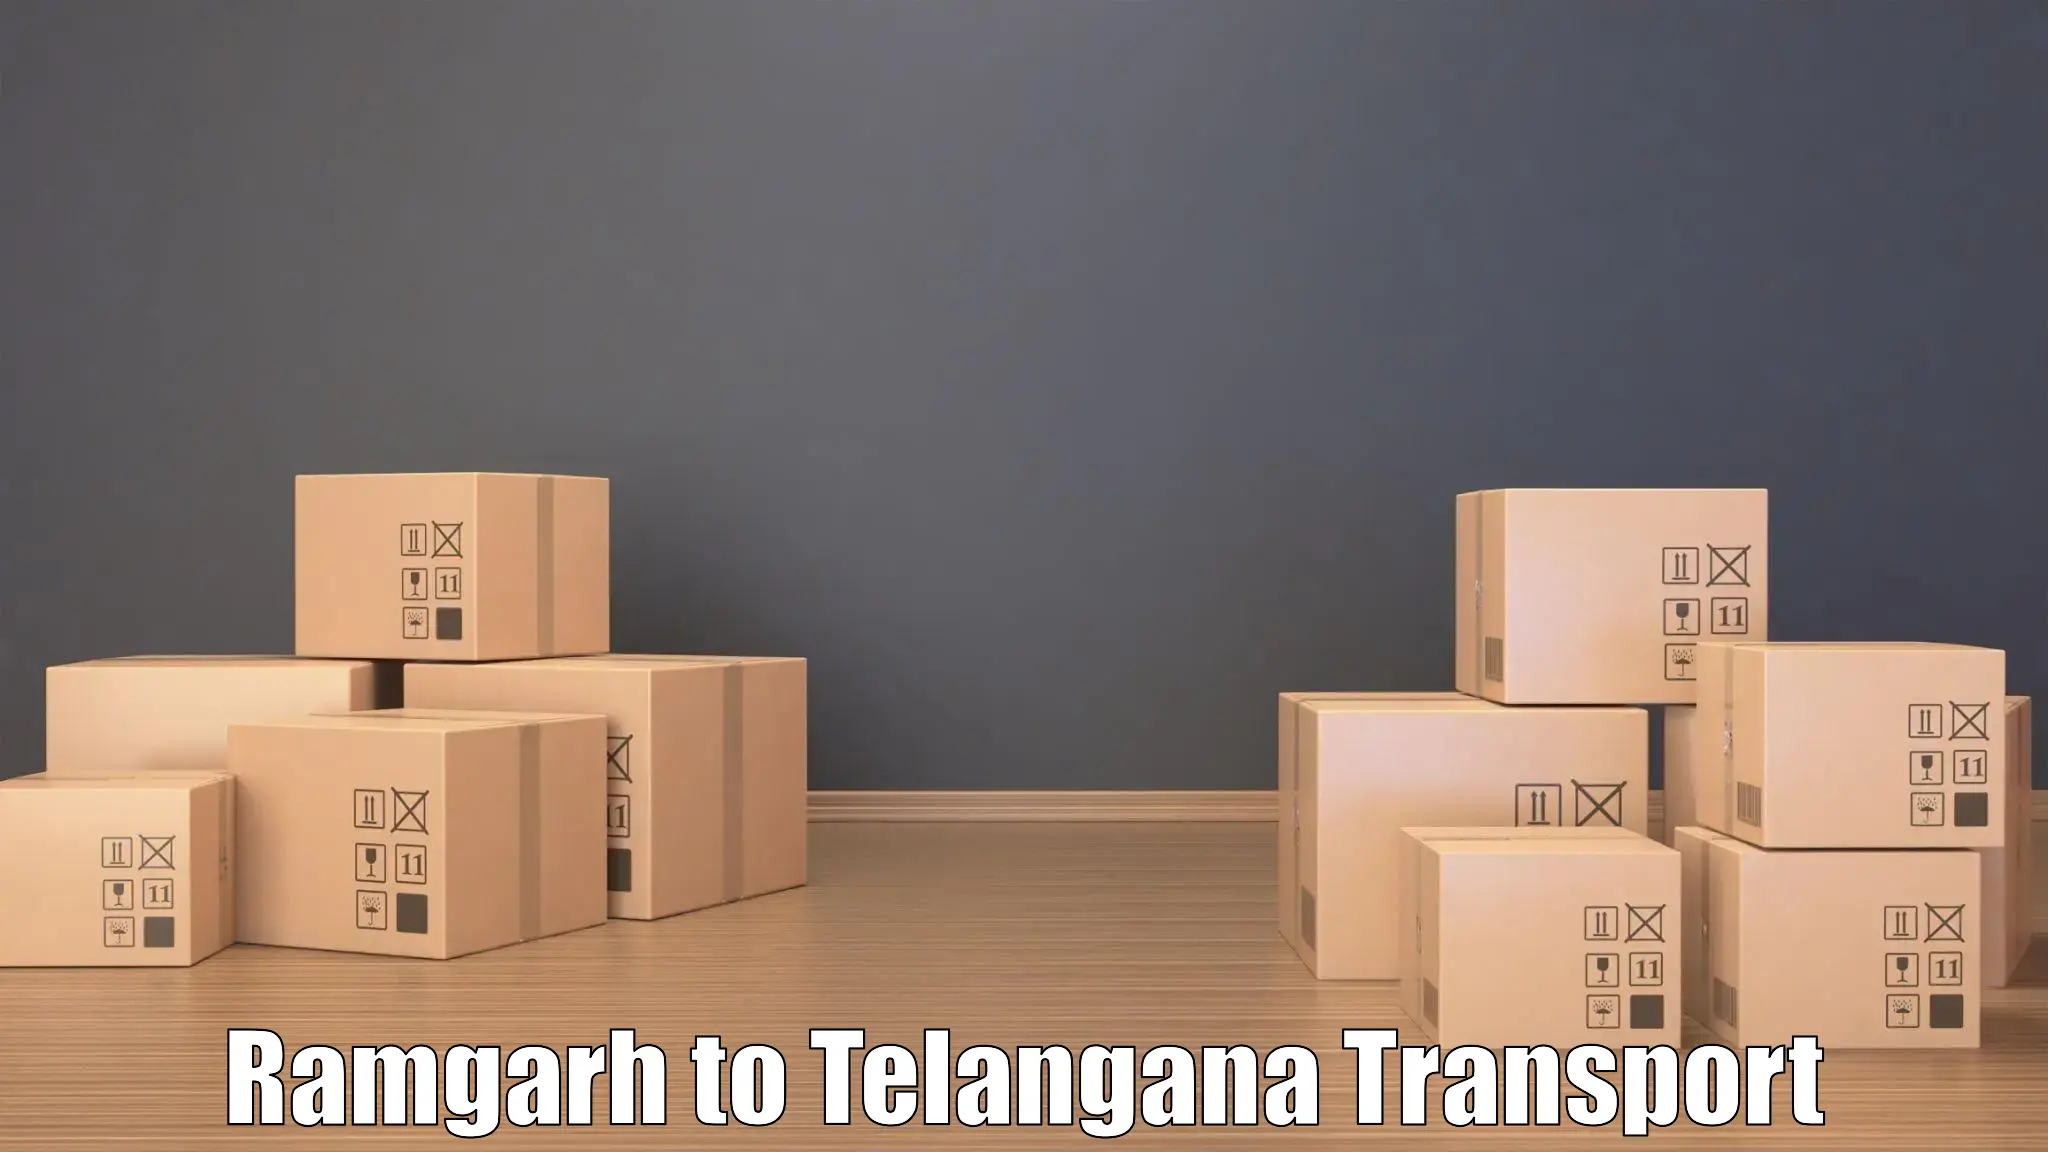 Vehicle parcel service Ramgarh to Secunderabad